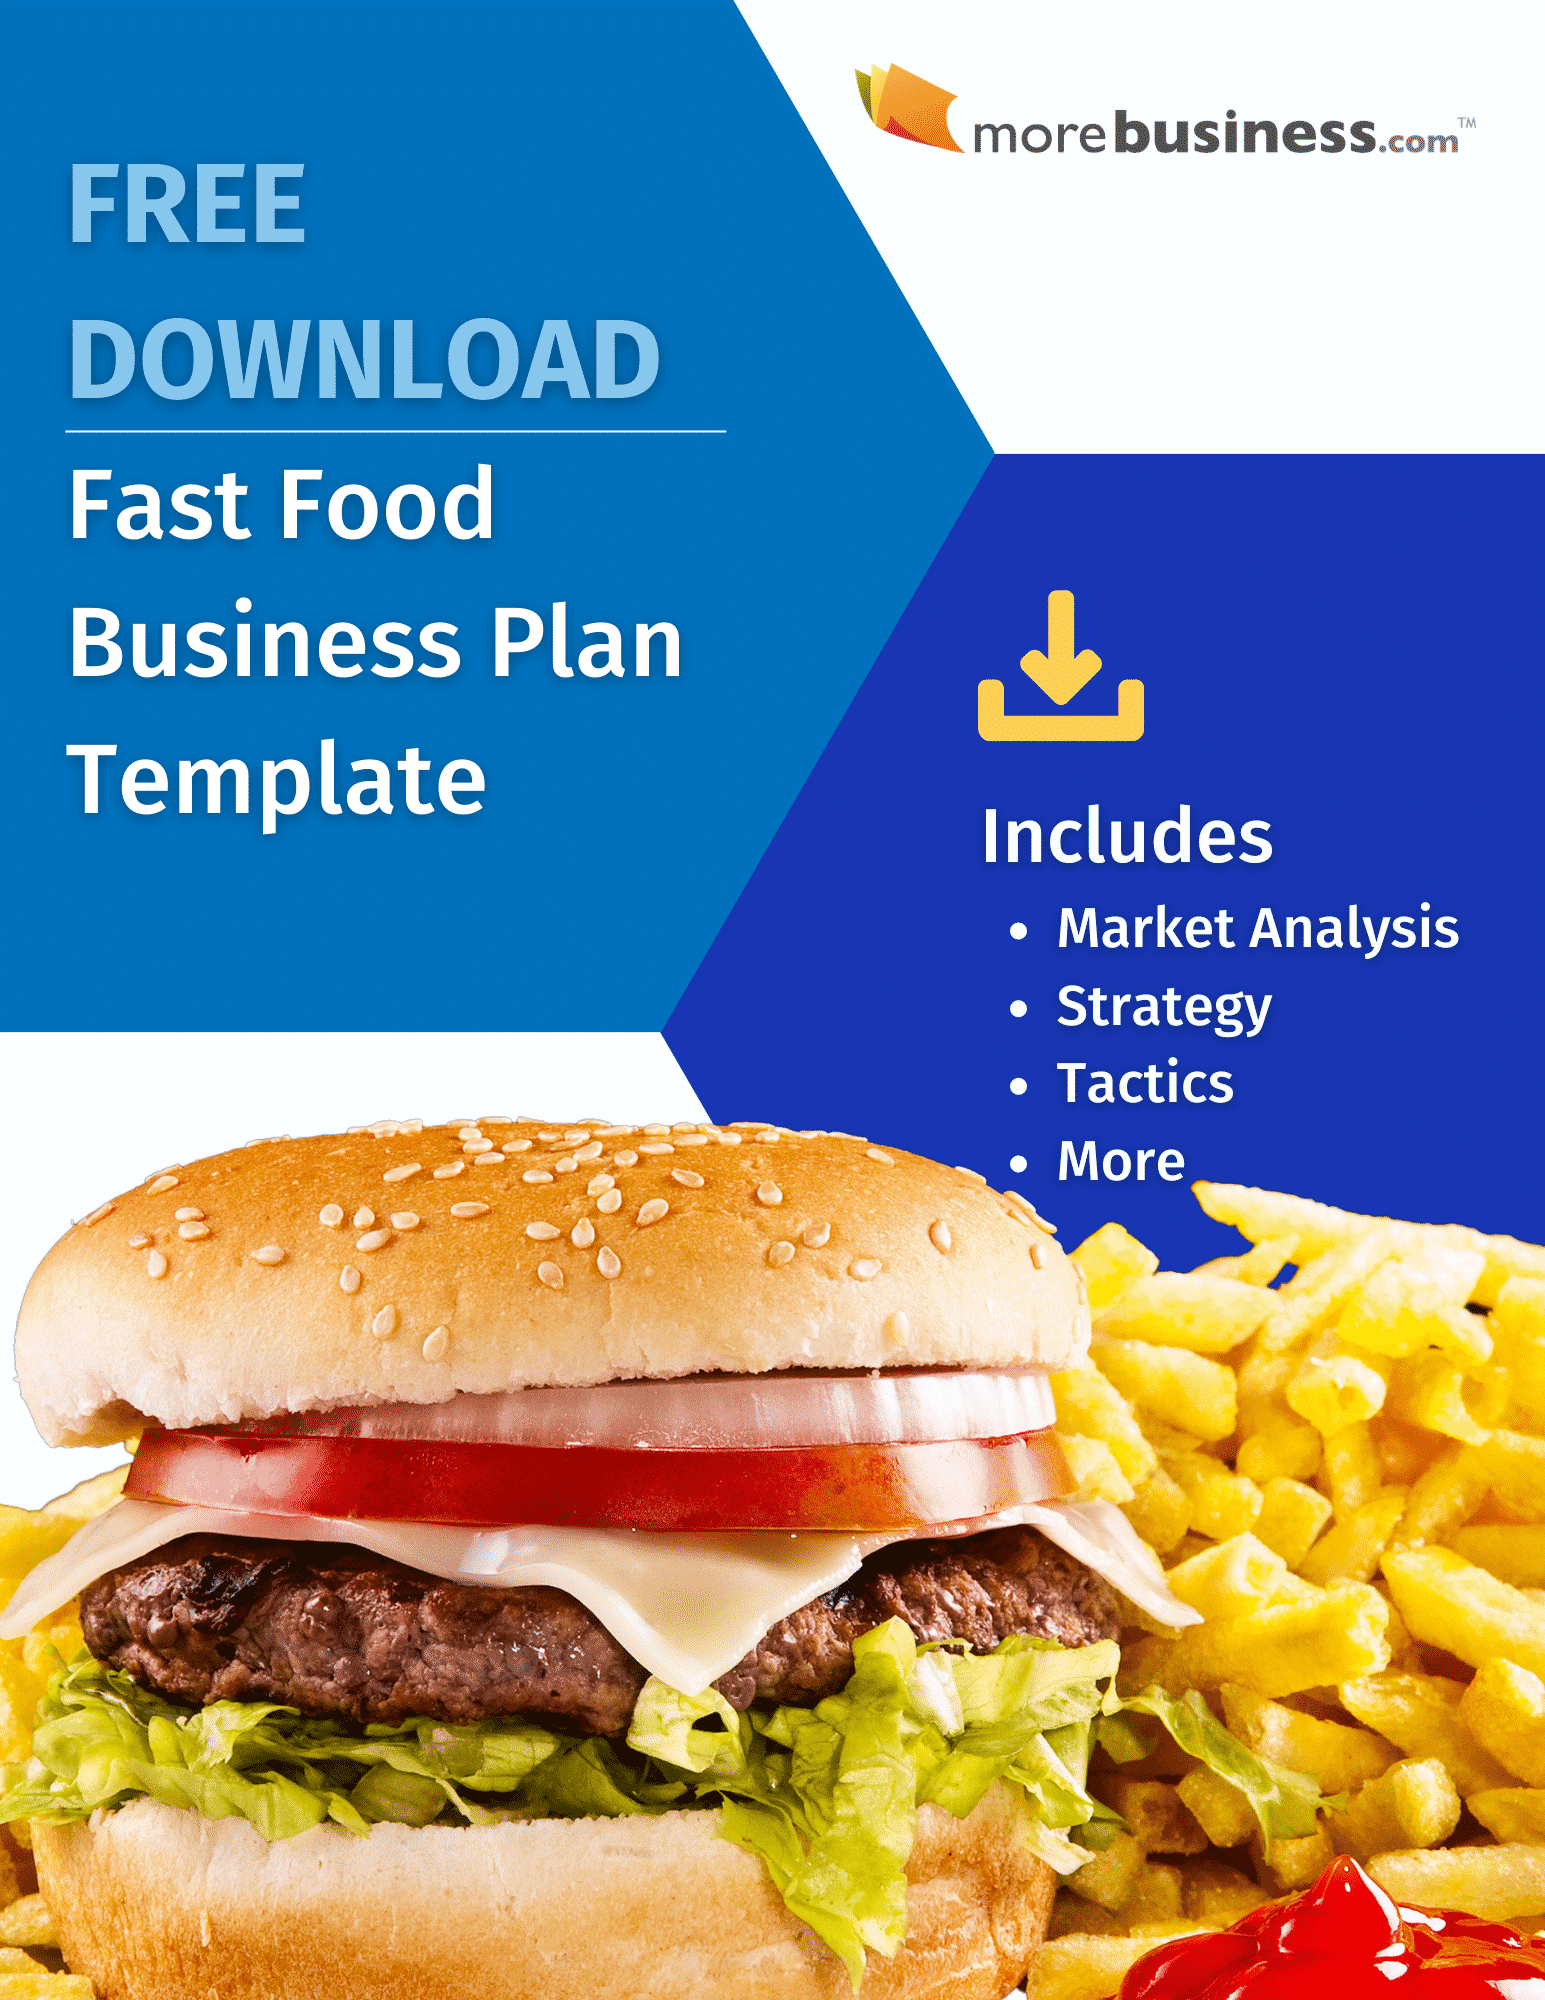 fast food business plan - free download